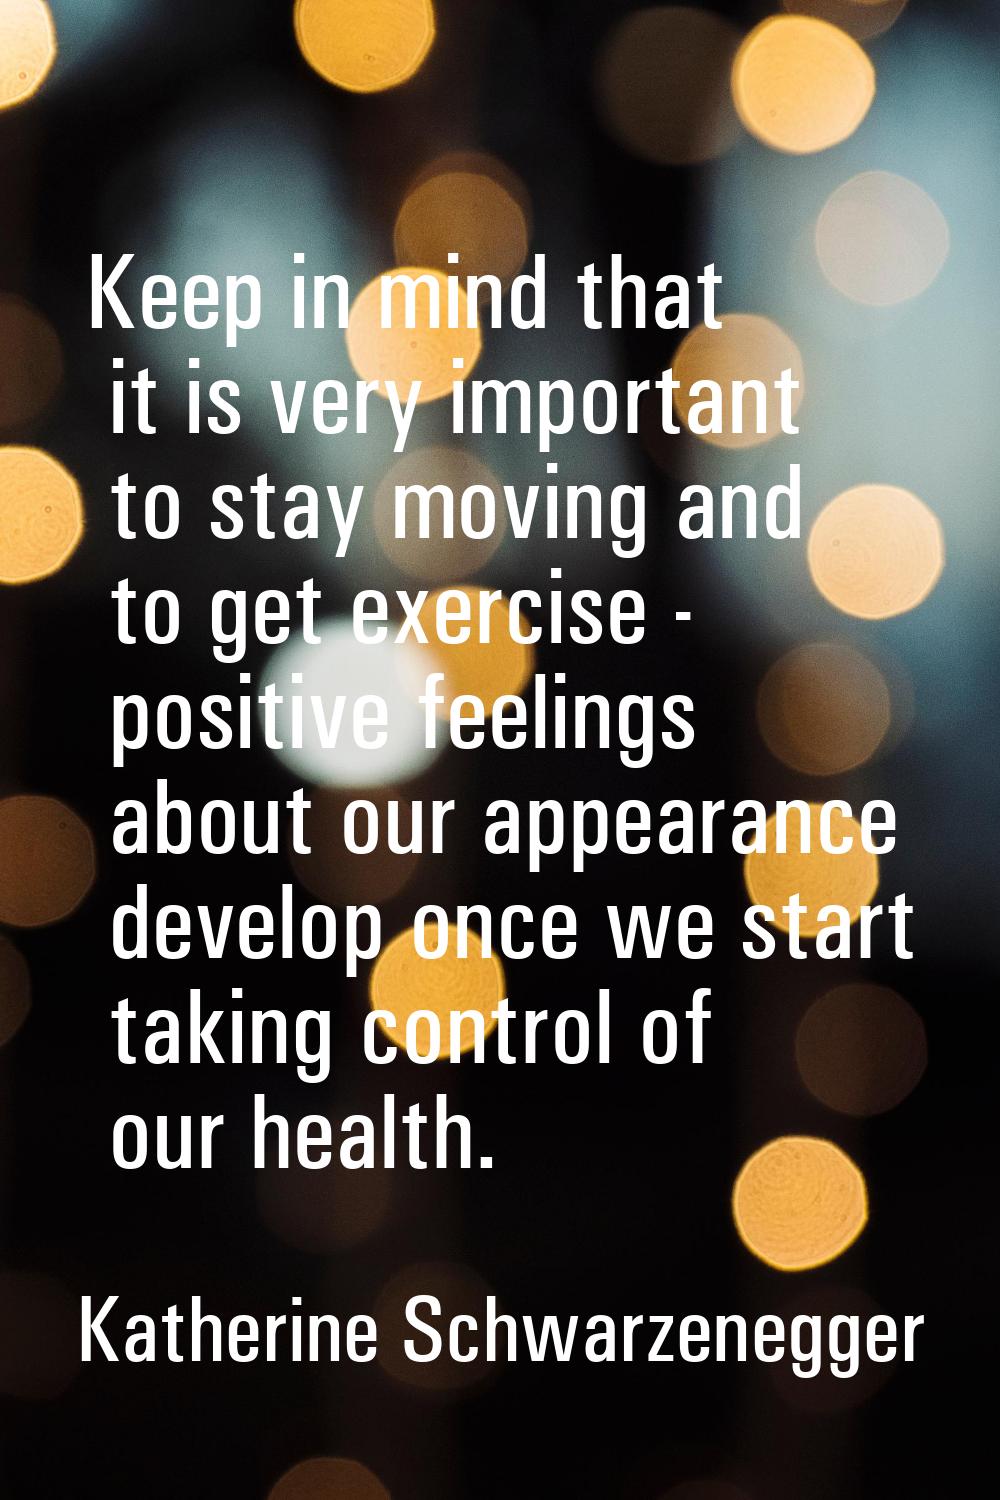 Keep in mind that it is very important to stay moving and to get exercise - positive feelings about